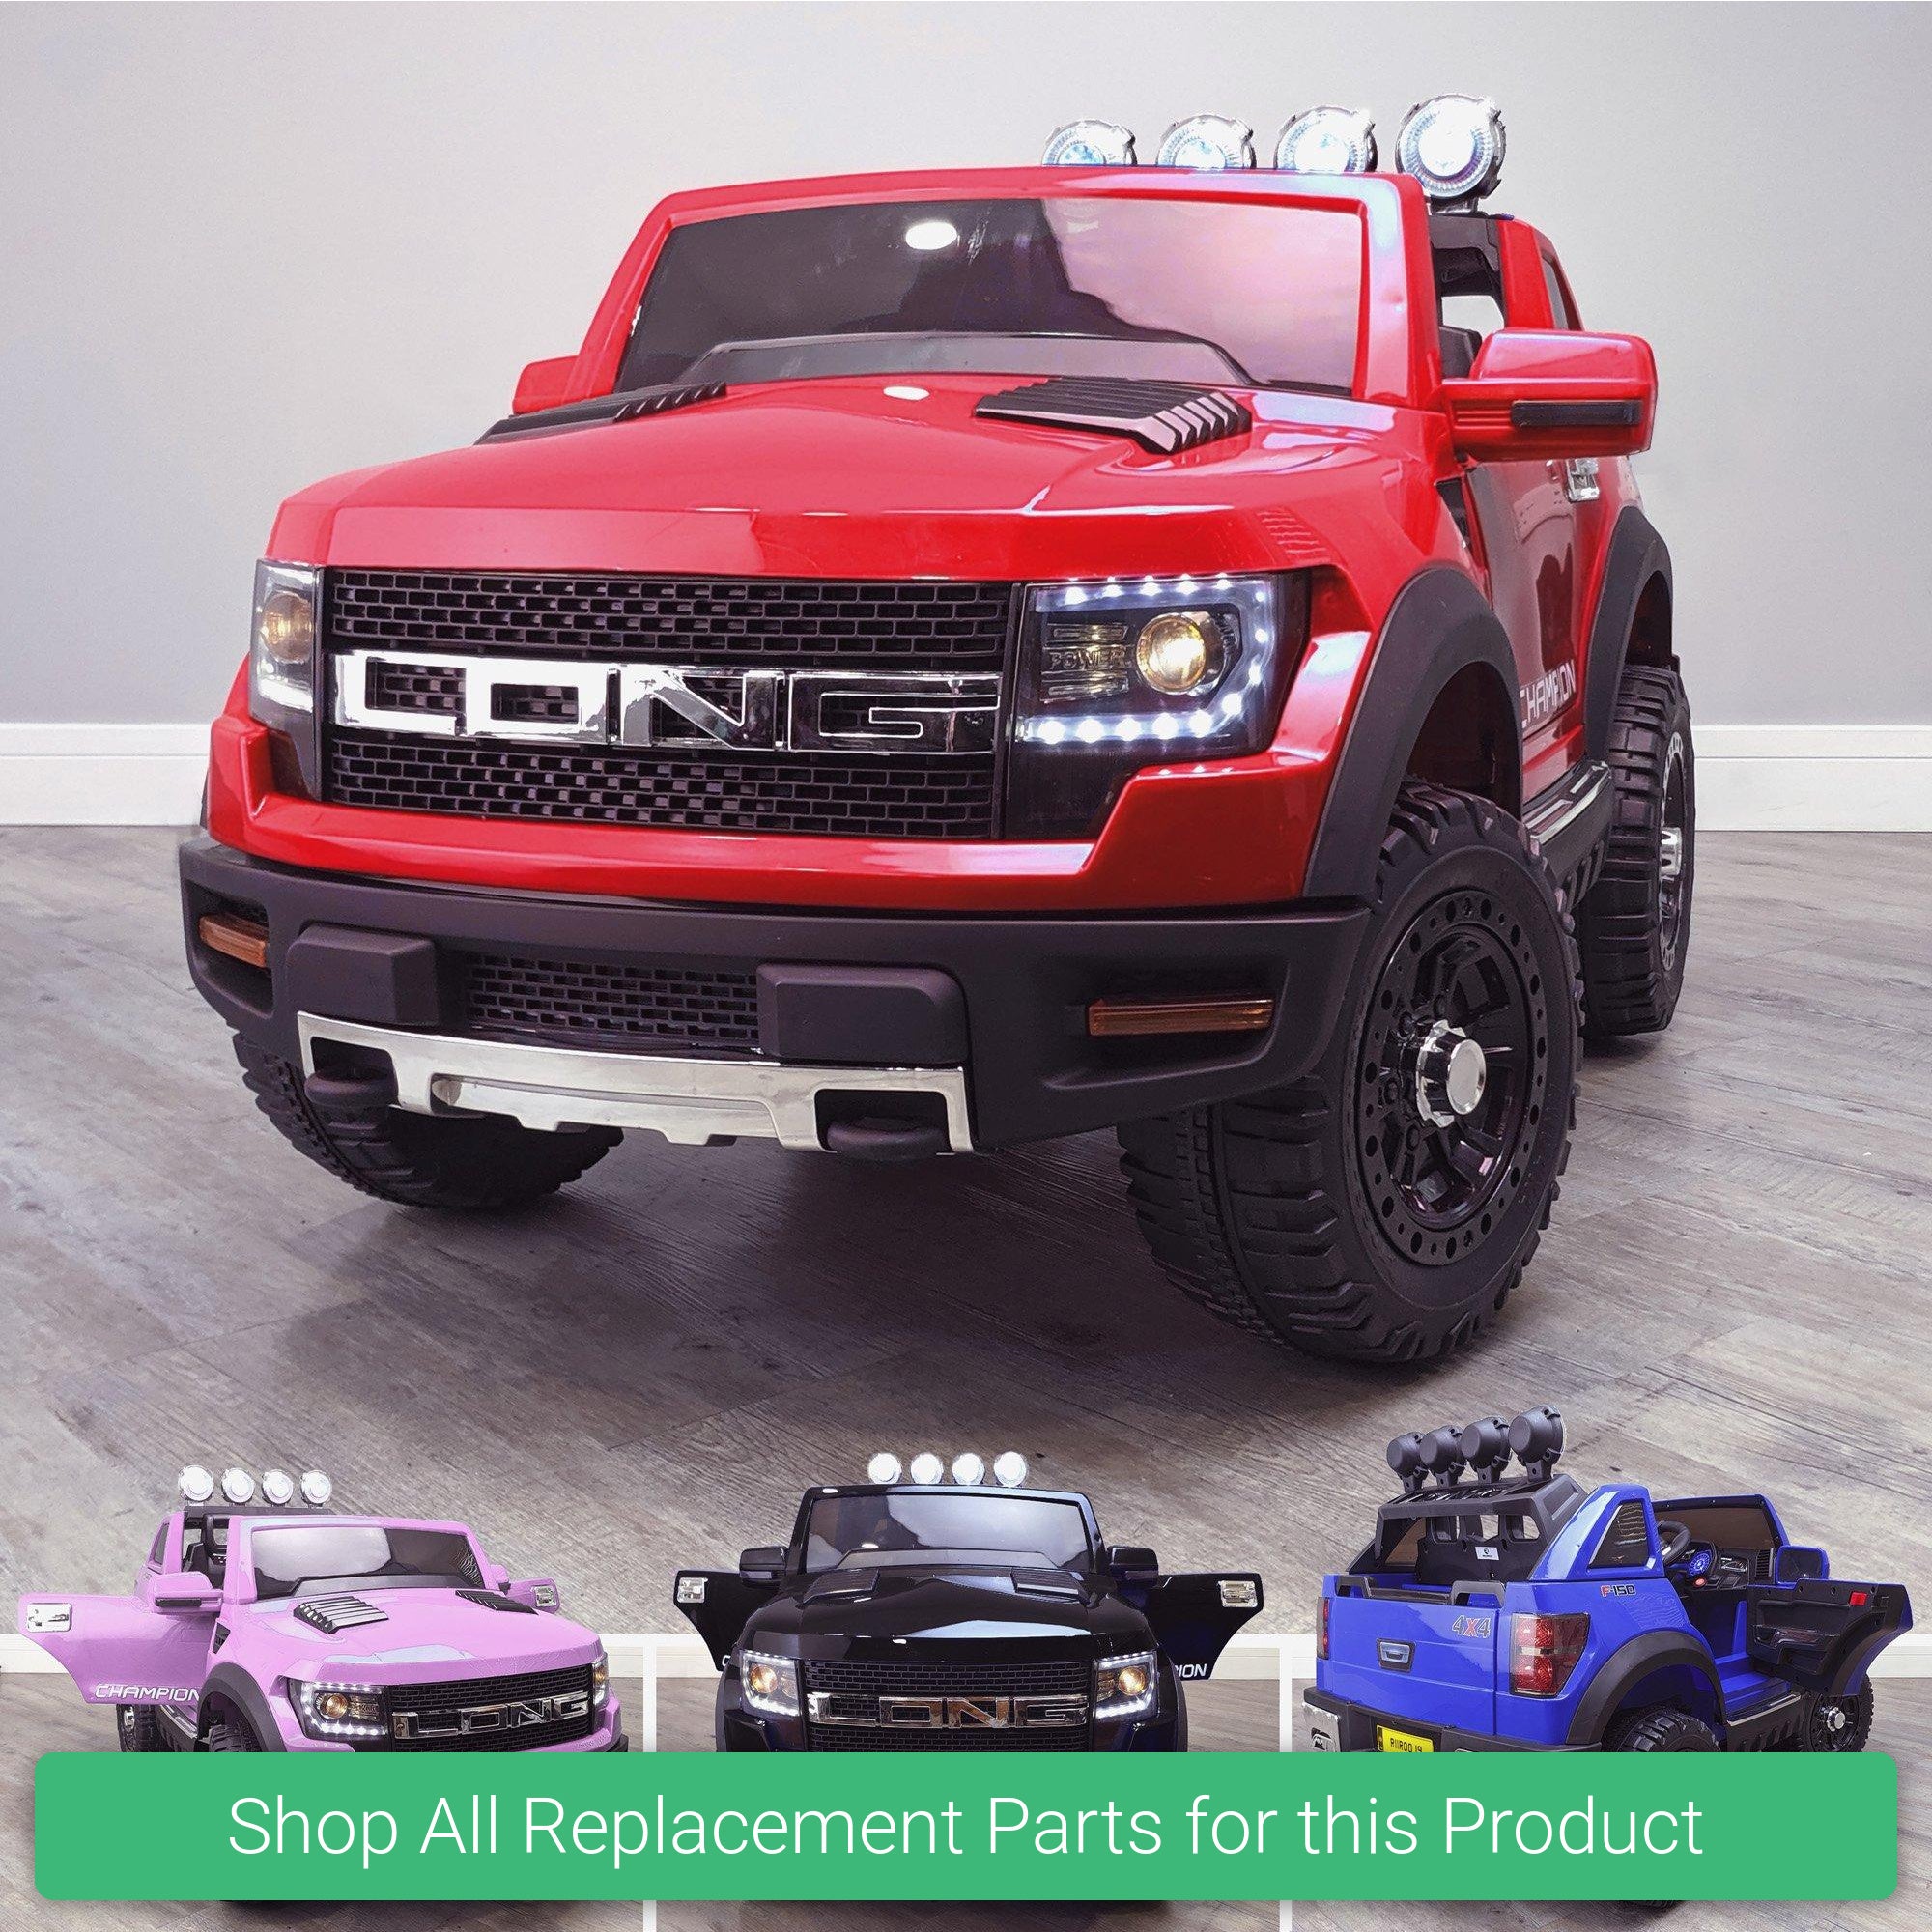 Replacement Parts and Spares for Kids Ford Ranger Wildtrack Style  - FRD-WILD-2019 - BBH-1388